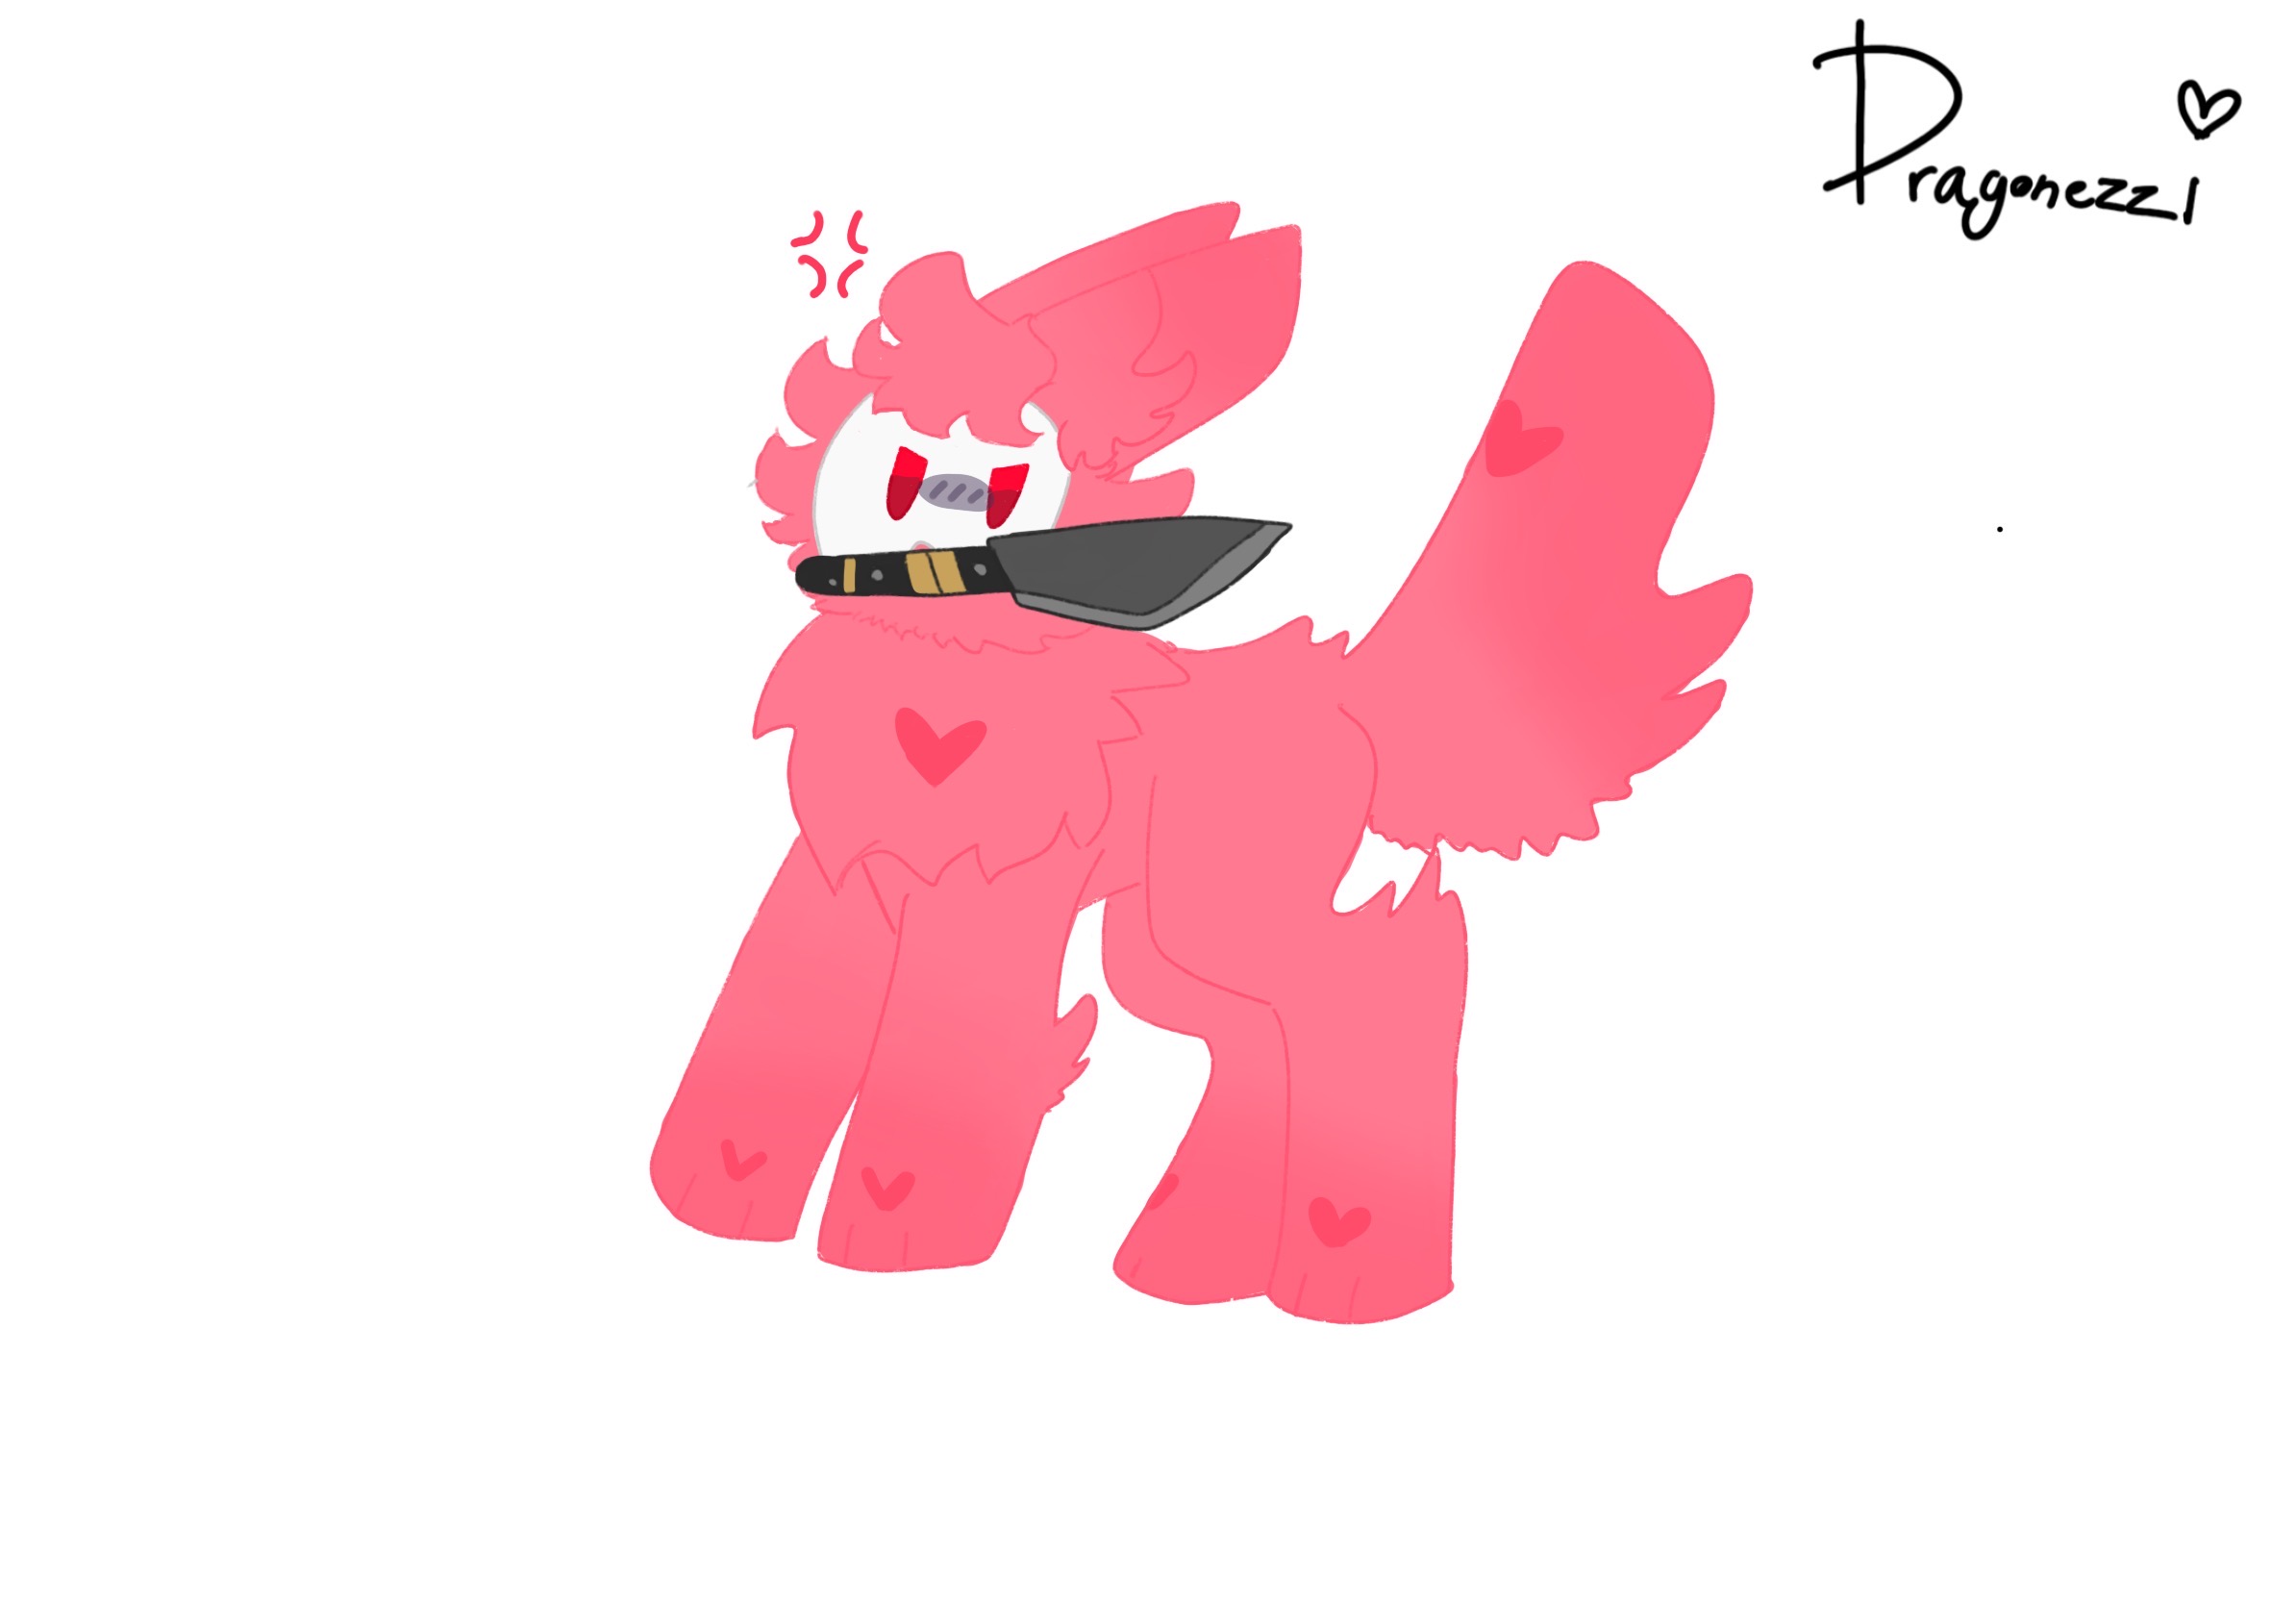 Fanart of a pink slime pup! (Kaiju Paradise!) by M33RKURY on